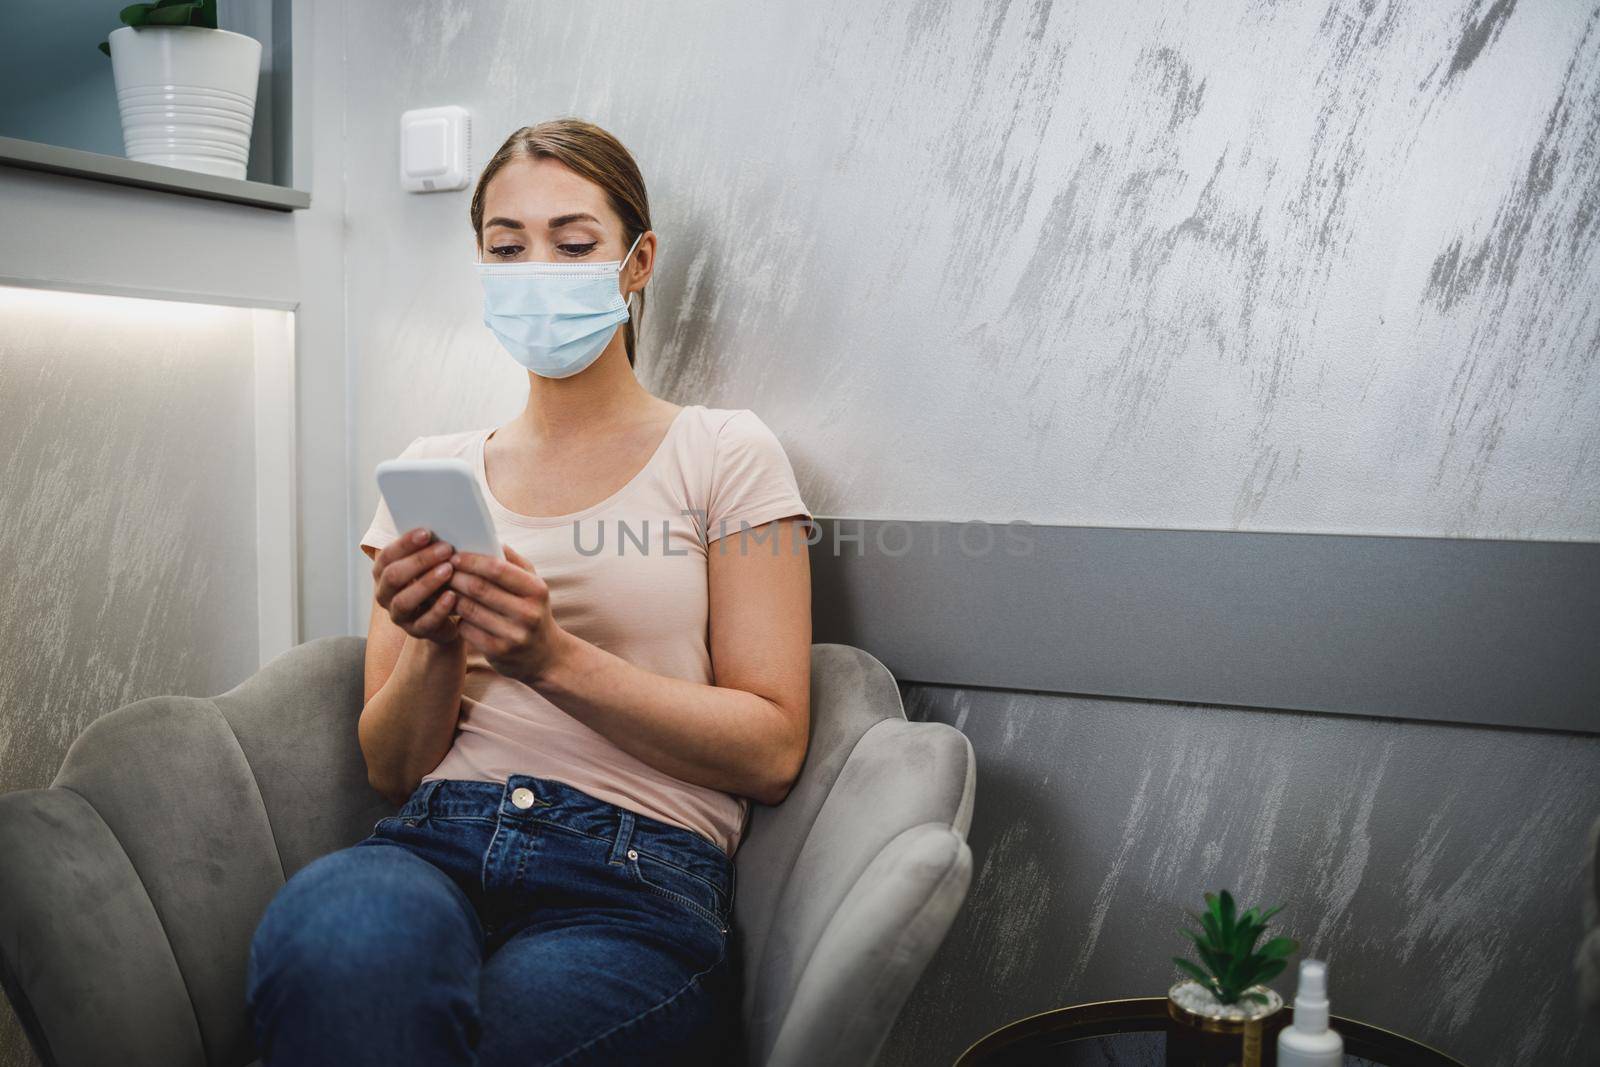 An attractive young woman wearing face mask and using her cellphone while sitting on a chair in waiting room at dentist's office.